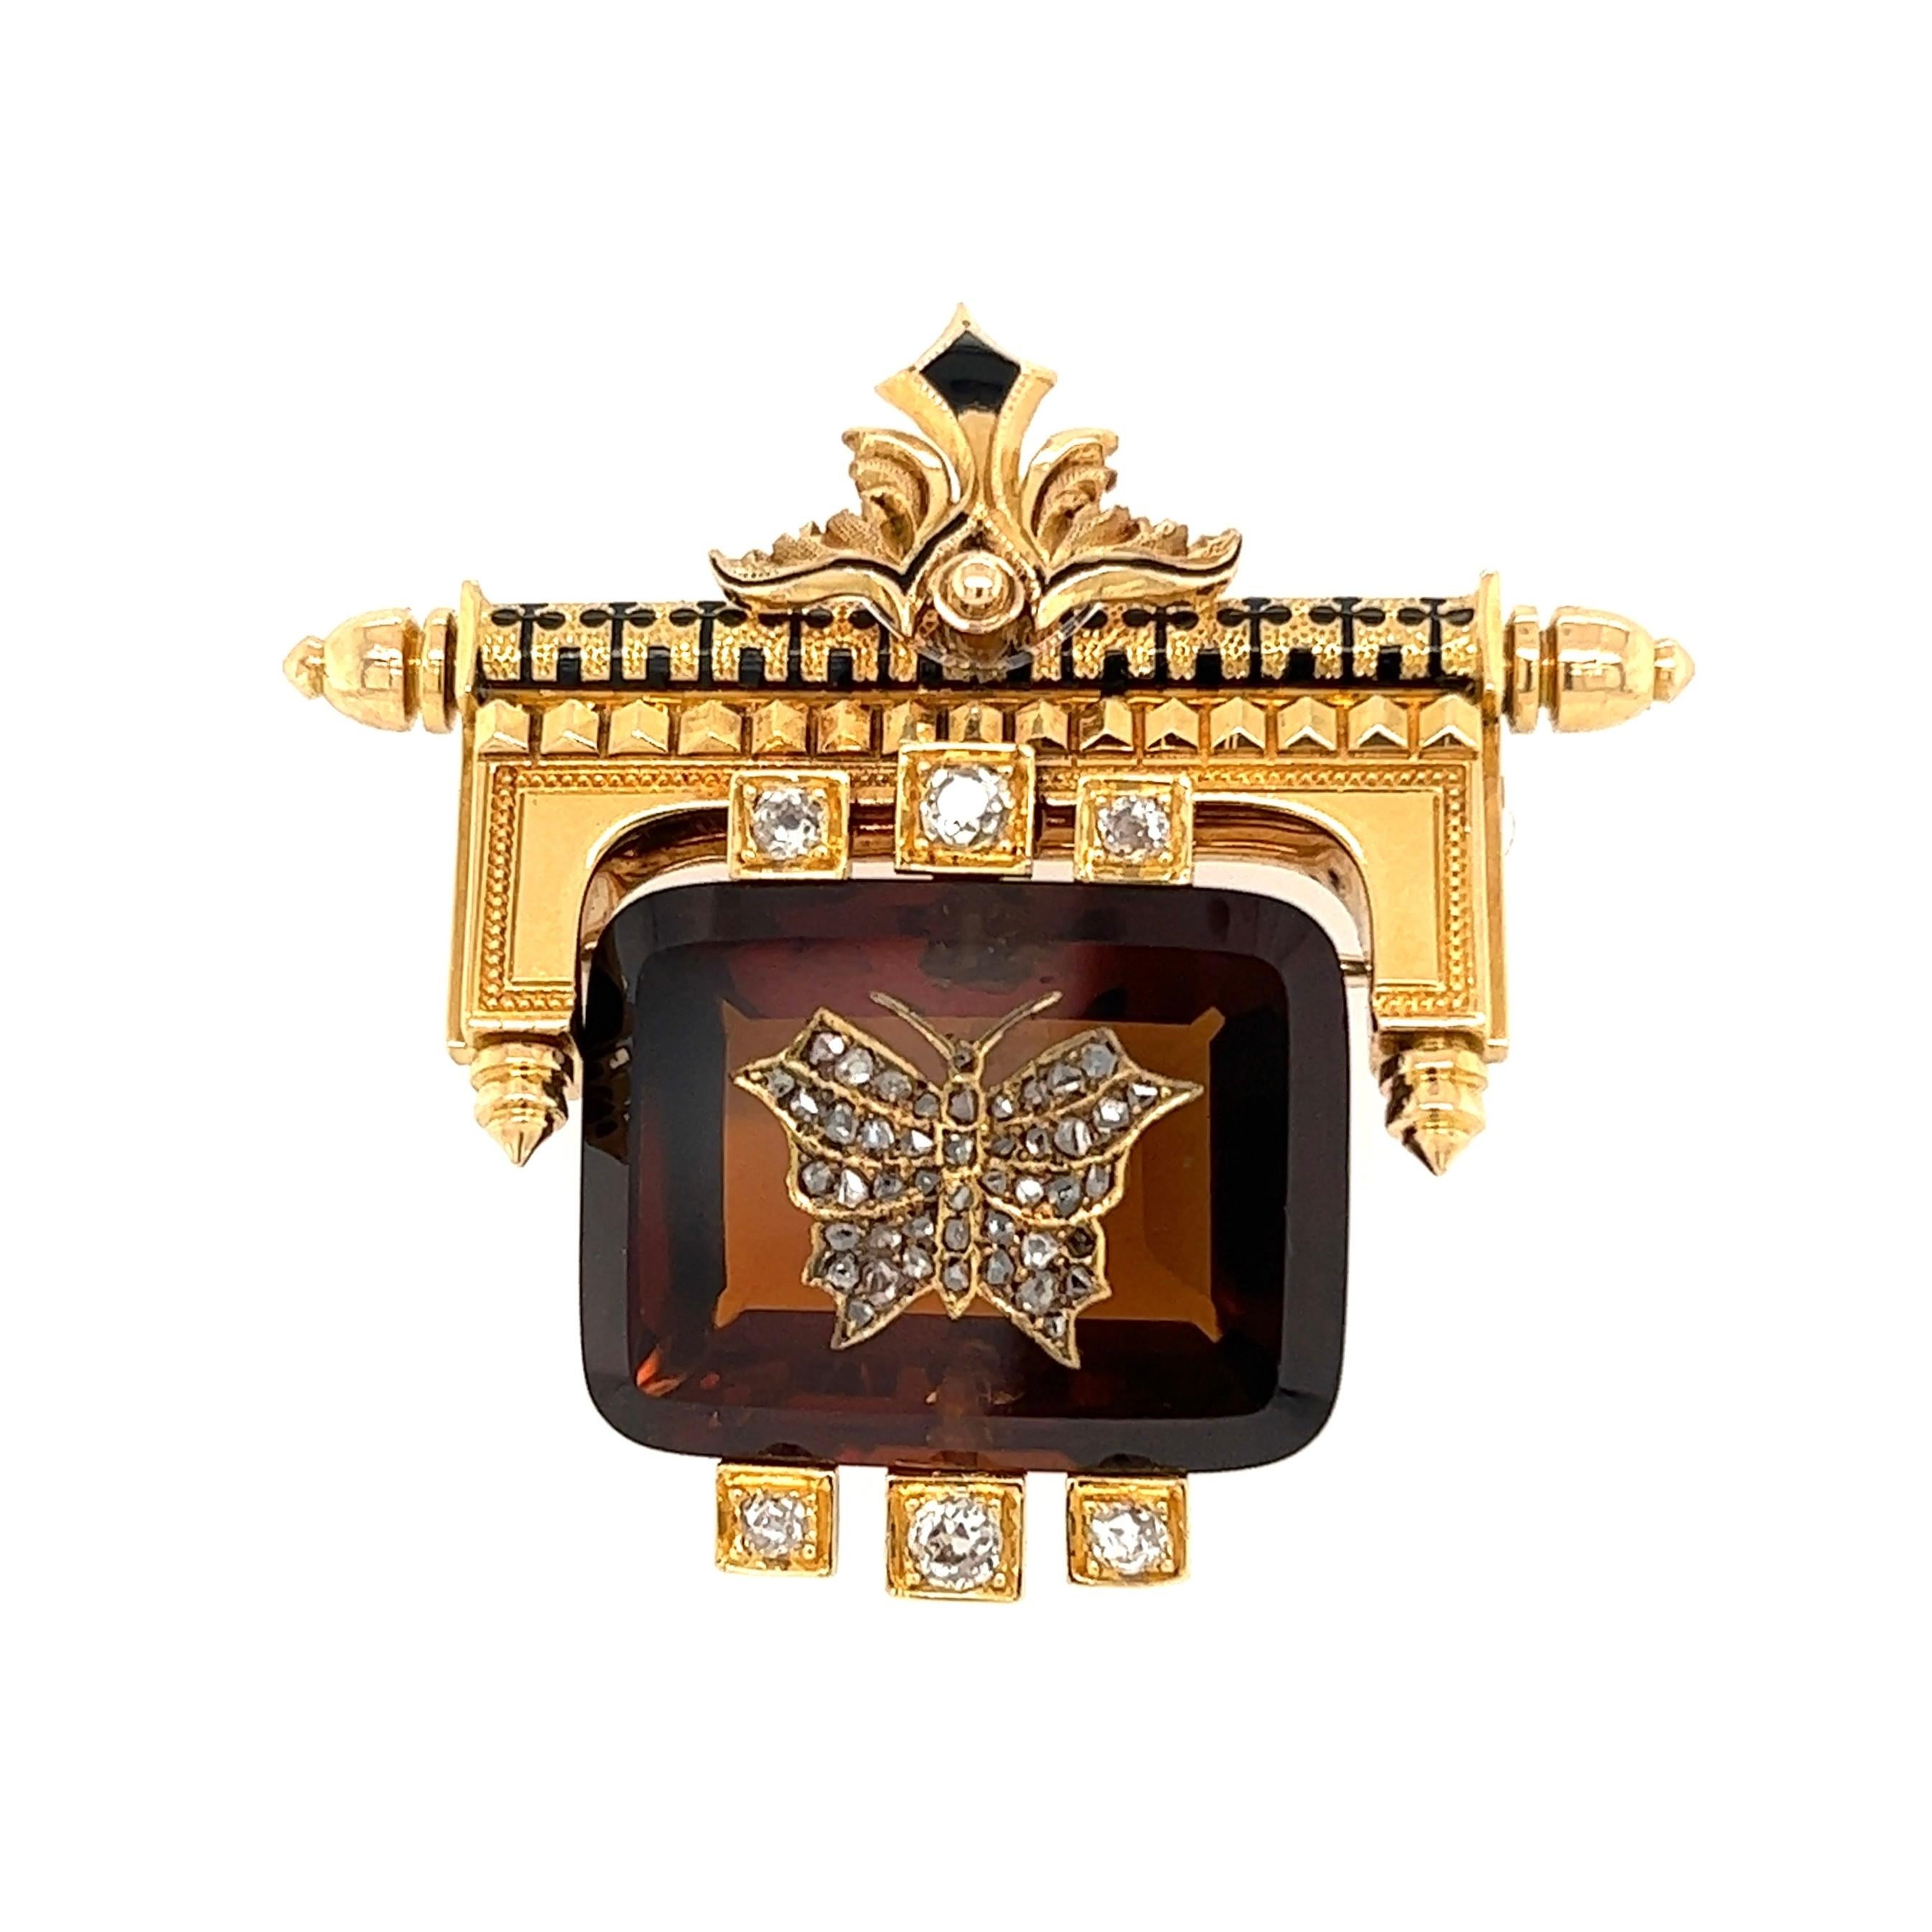 Simply Beautiful! Finely detailed High Quality Antique Diamond, Quartz and Enamel Articulated Gold Brooch. Beautifully Hand crafted rectangular Quartz featuring a Diamond Butterfly Design. Enhanced with Hand set Diamonds approx. 0.40tcw total Carat